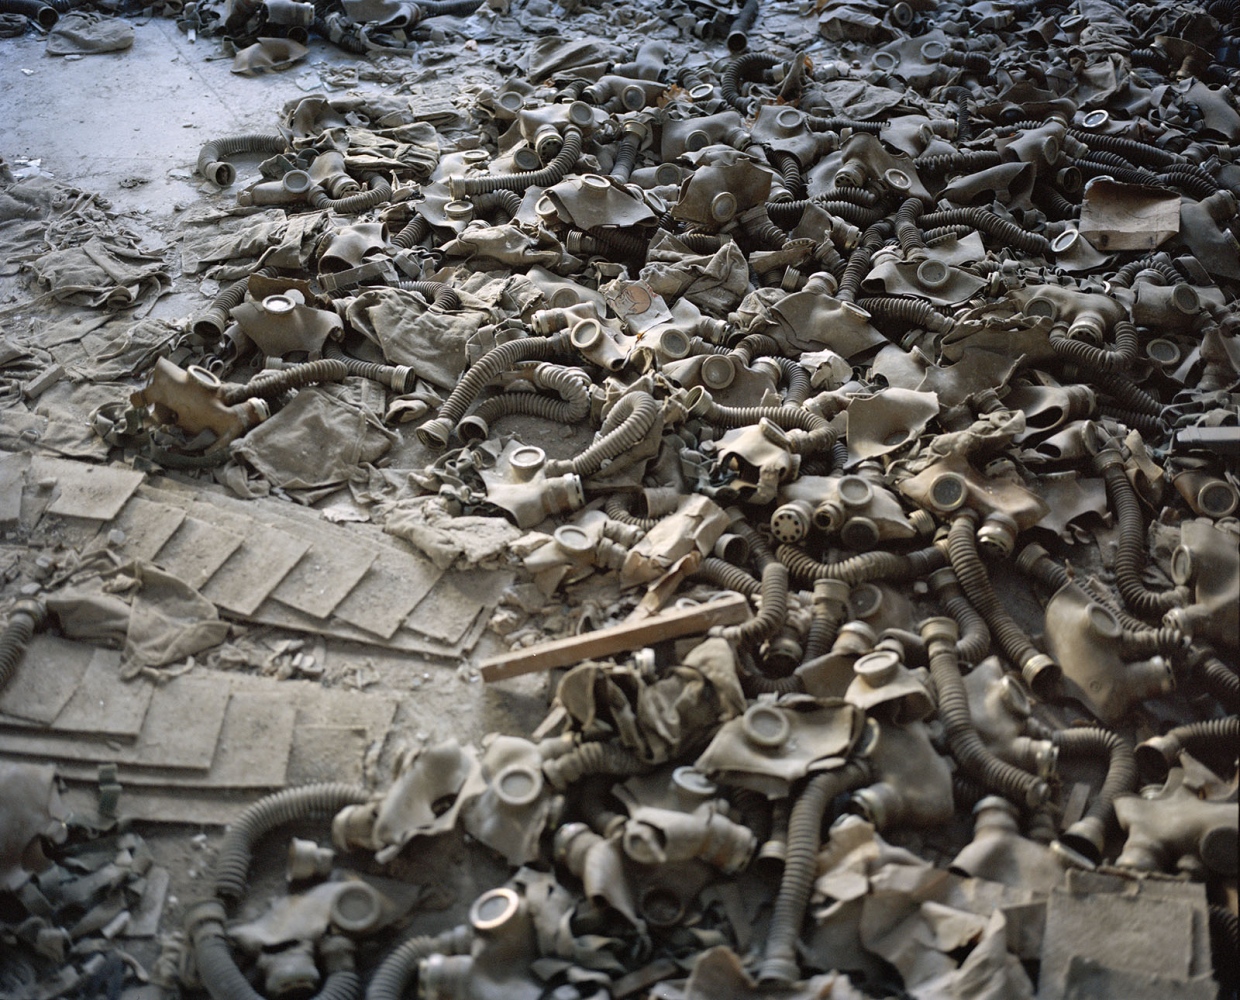 Chernobyl: Still Life in the Zone  - Gas masks scattered on the floor of a school lobby in the...